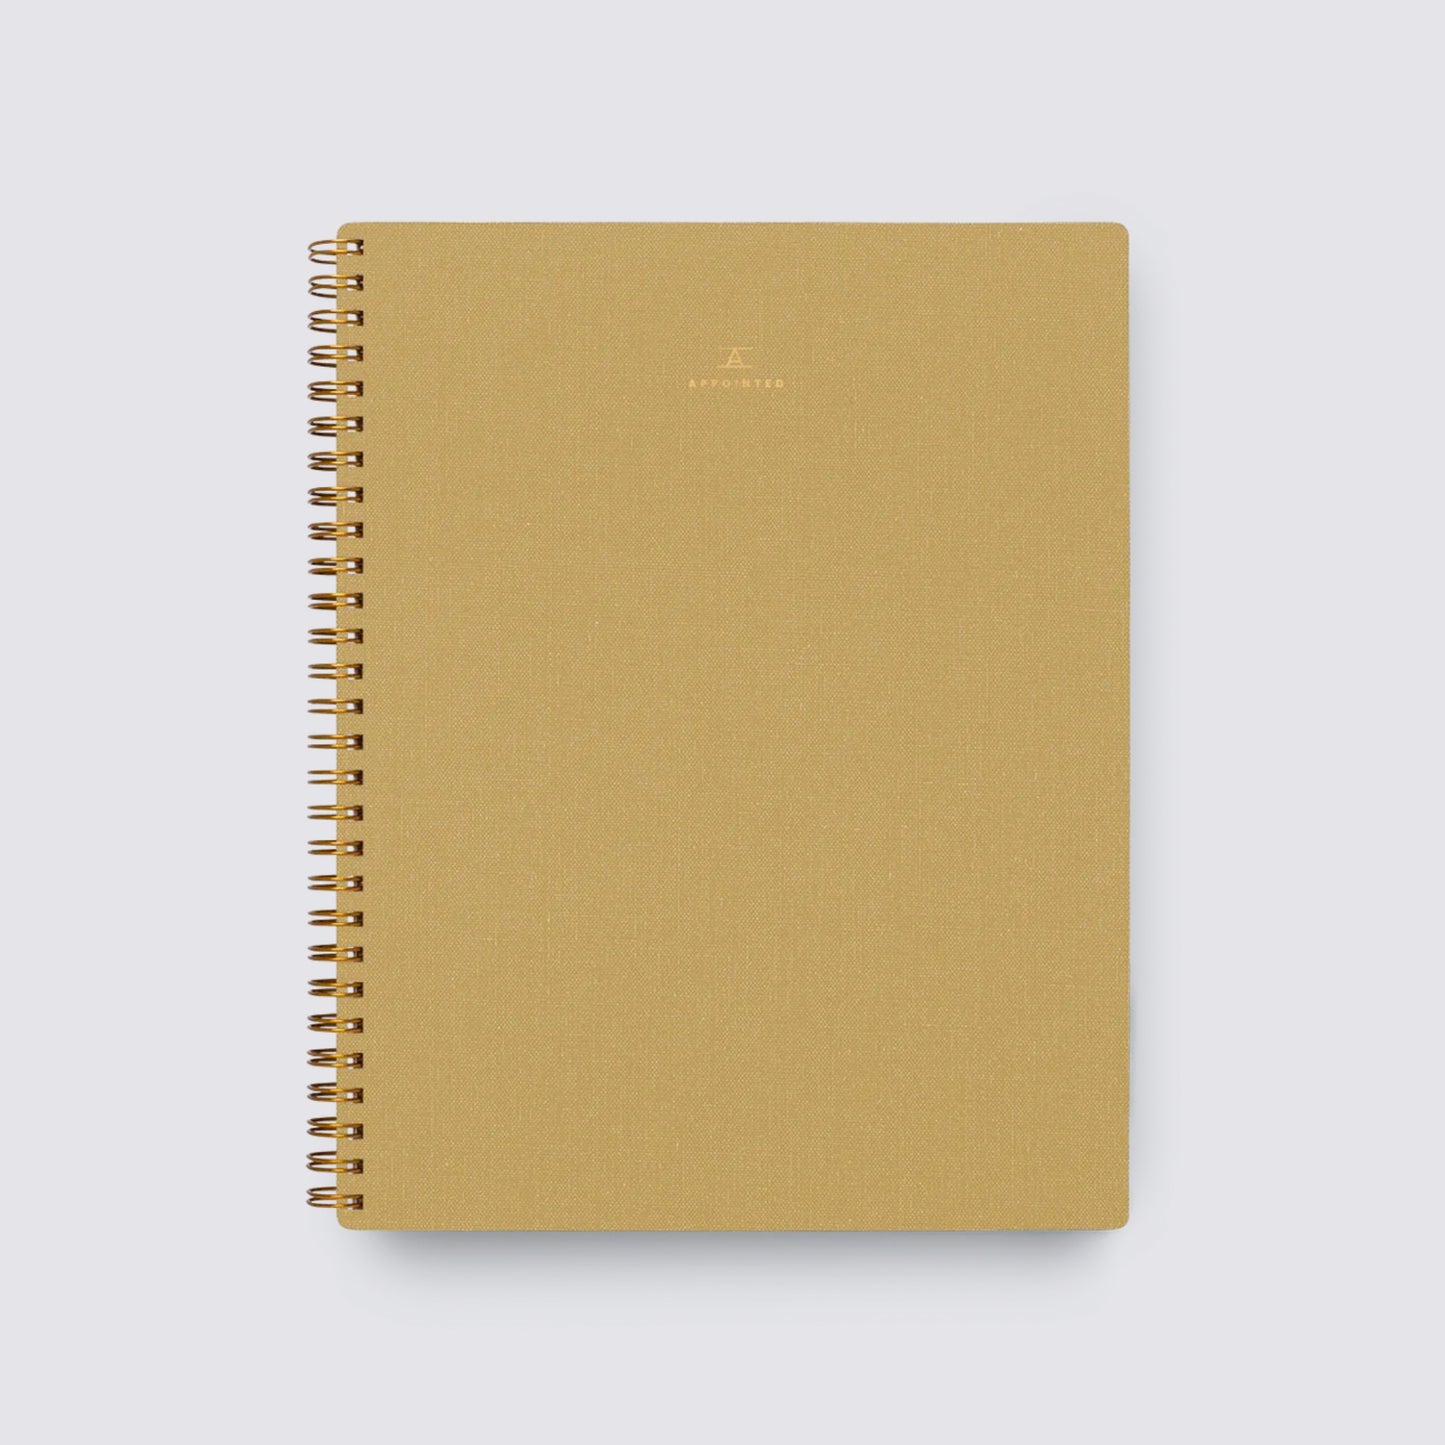 Dune Appointed notebook